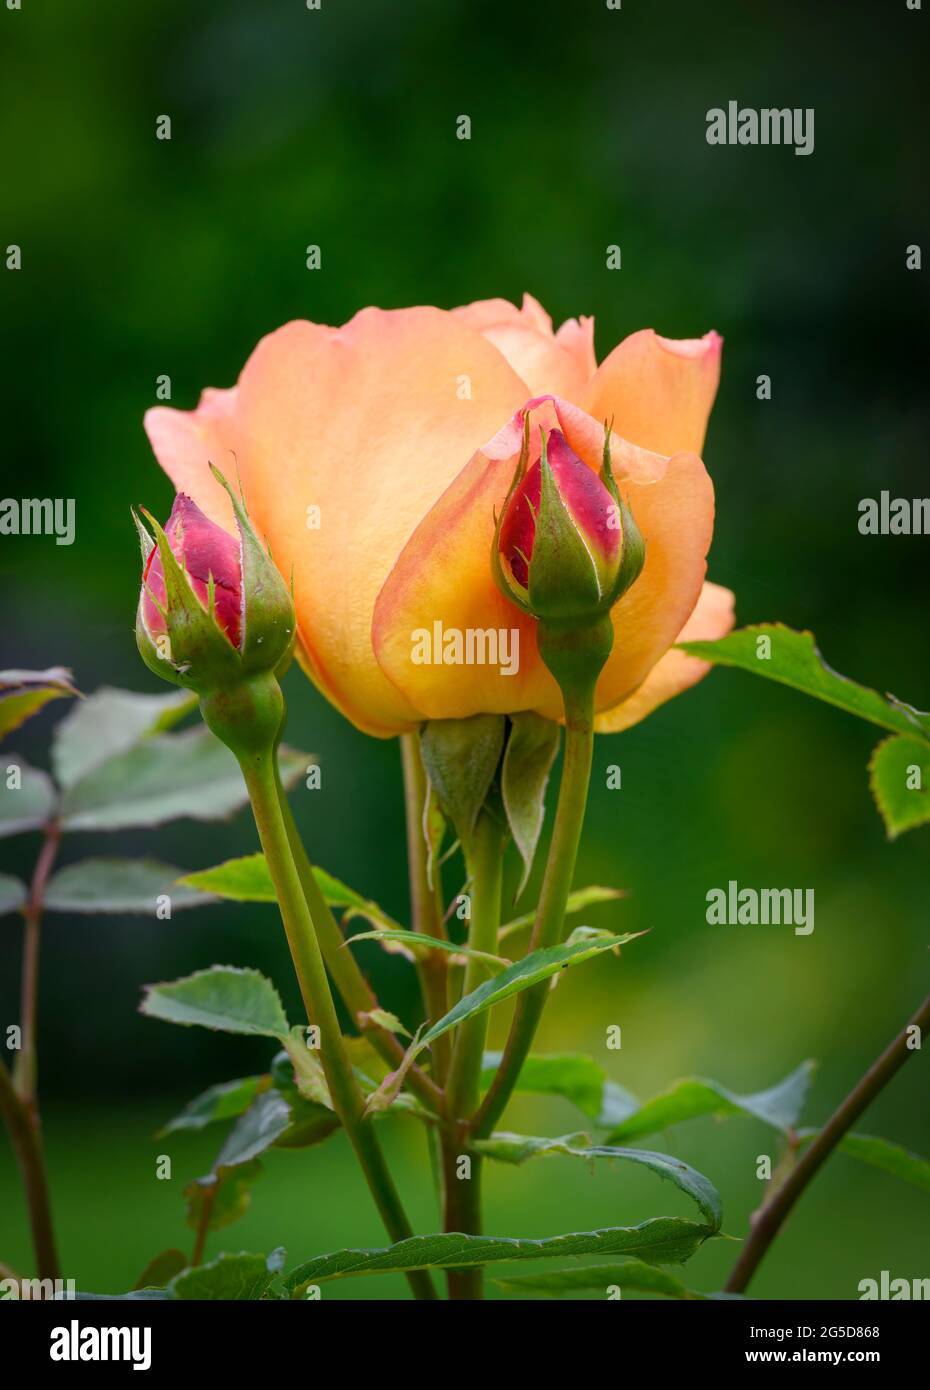 https://c8.alamy.com/comp/2G5D868/beautiful-pale-orange-rose-in-full-bloom-and-surrounded-by-rosebuds-2G5D868.jpg